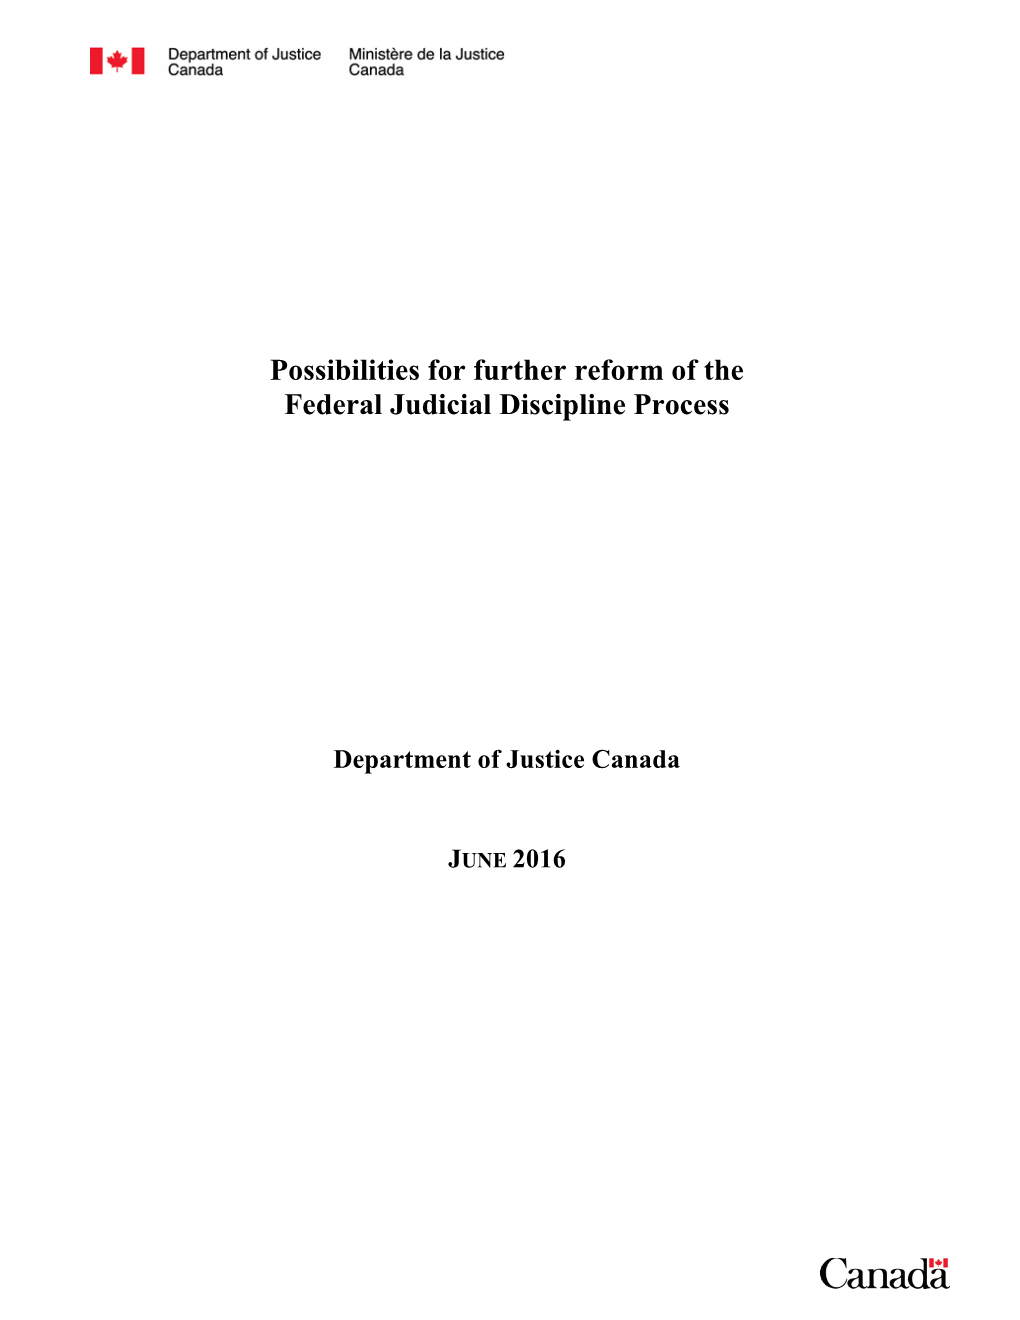 Possibilities for Further Reform of the Federal Judicial Discipline Process